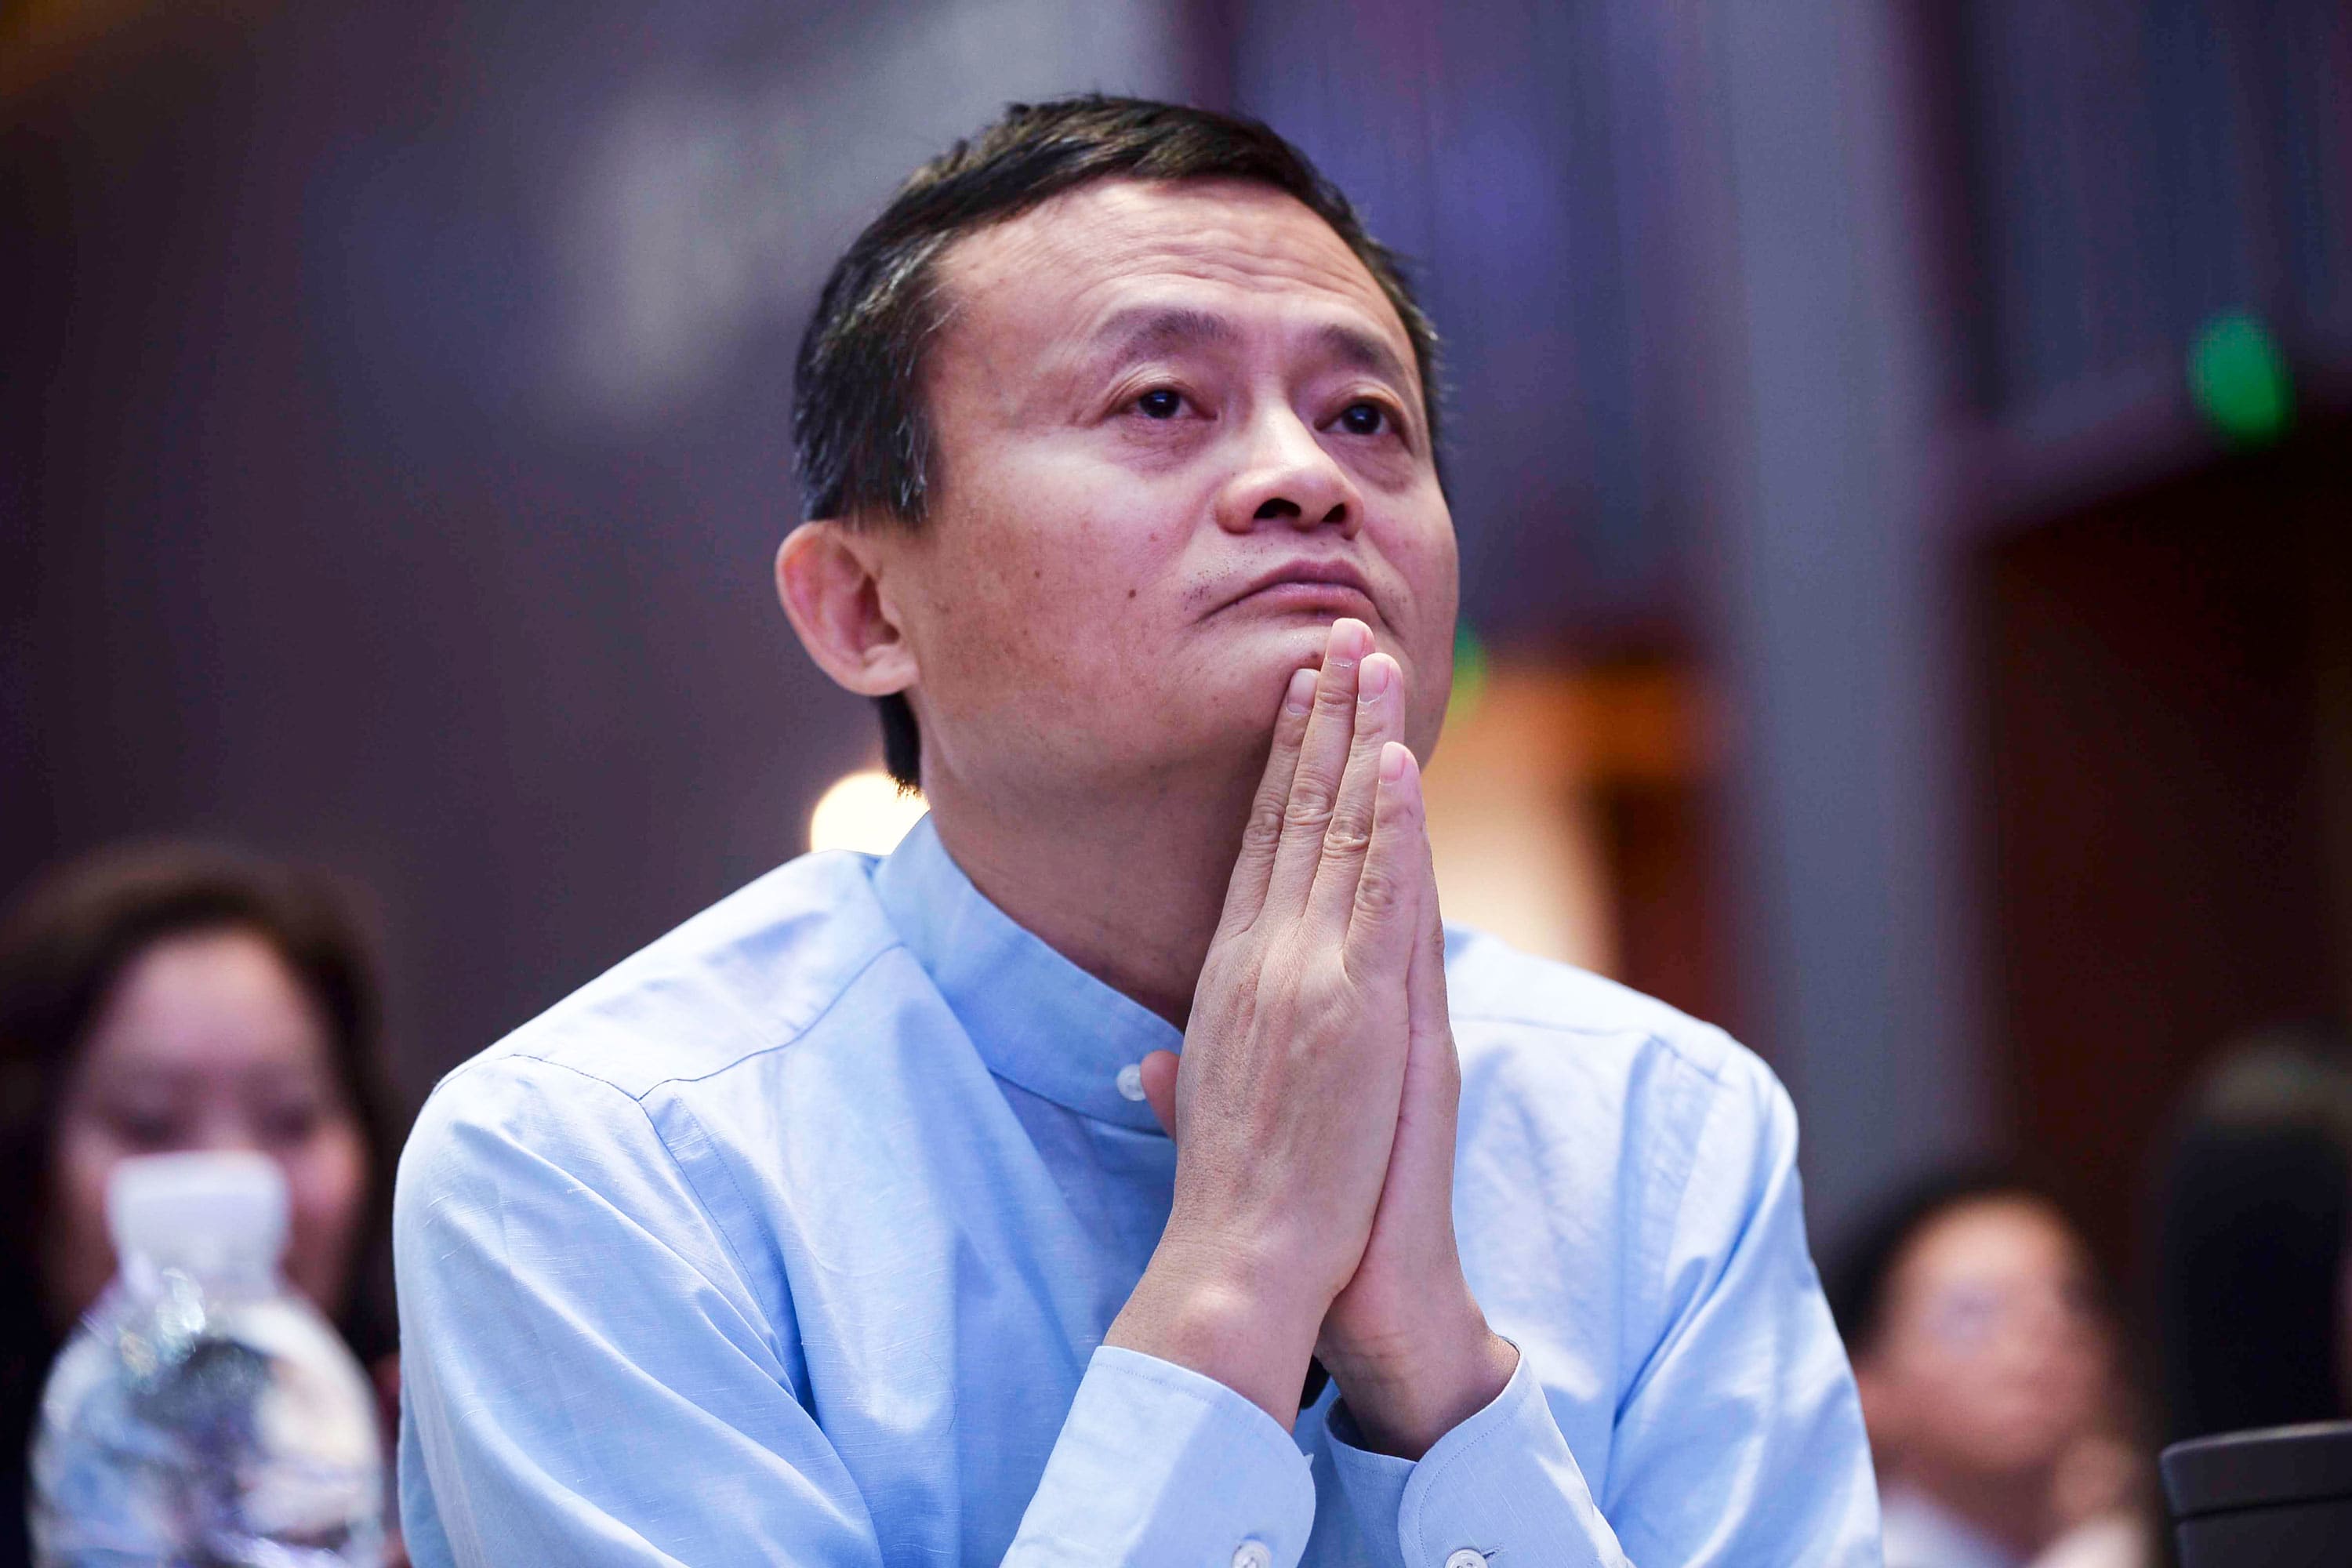 Jack Ma’s disappearance raises speculation about where the billionaire is